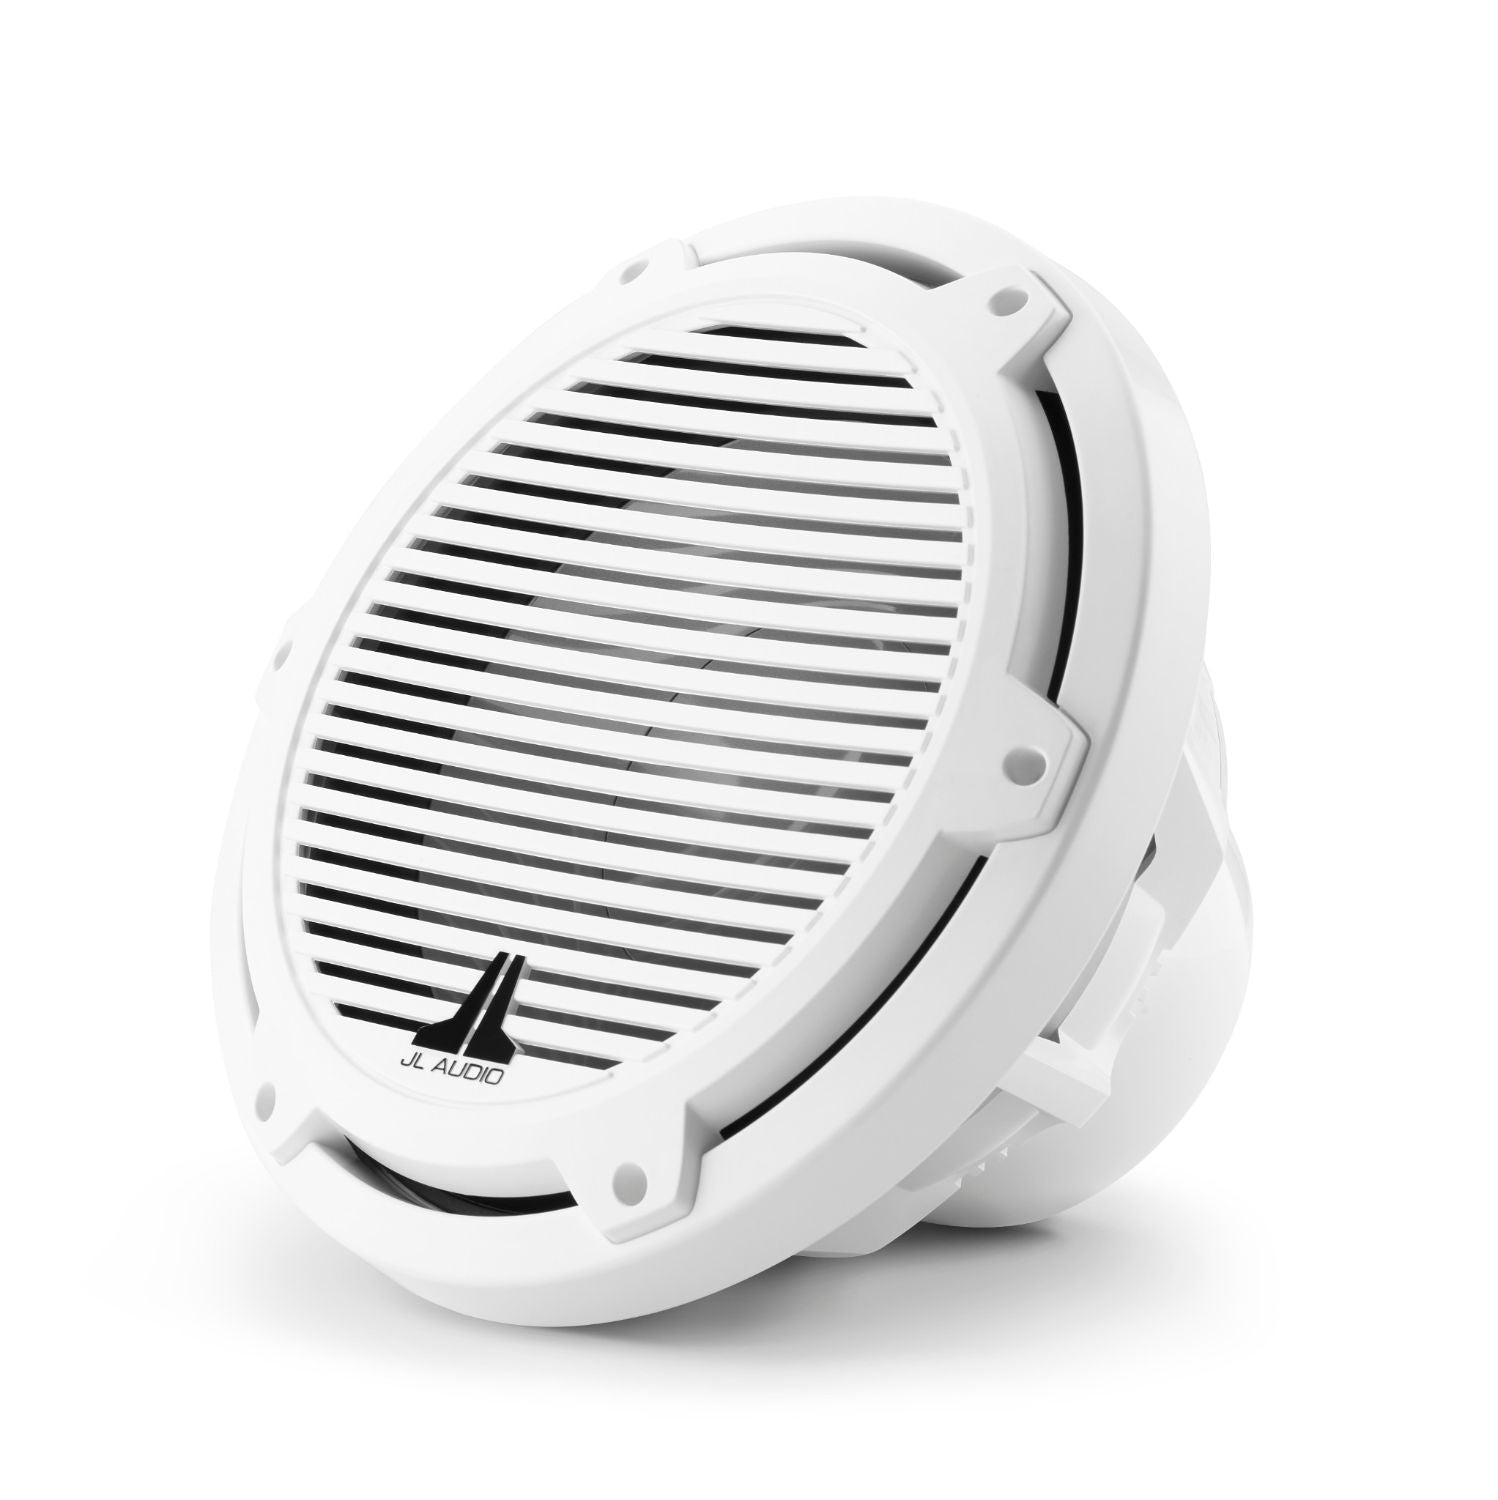 JL Audio MX10IB3-SG-WH10-inch Marine Subwoofer Driver Sport White Grille  With RGB LED Speaker Ring - Creative Audio